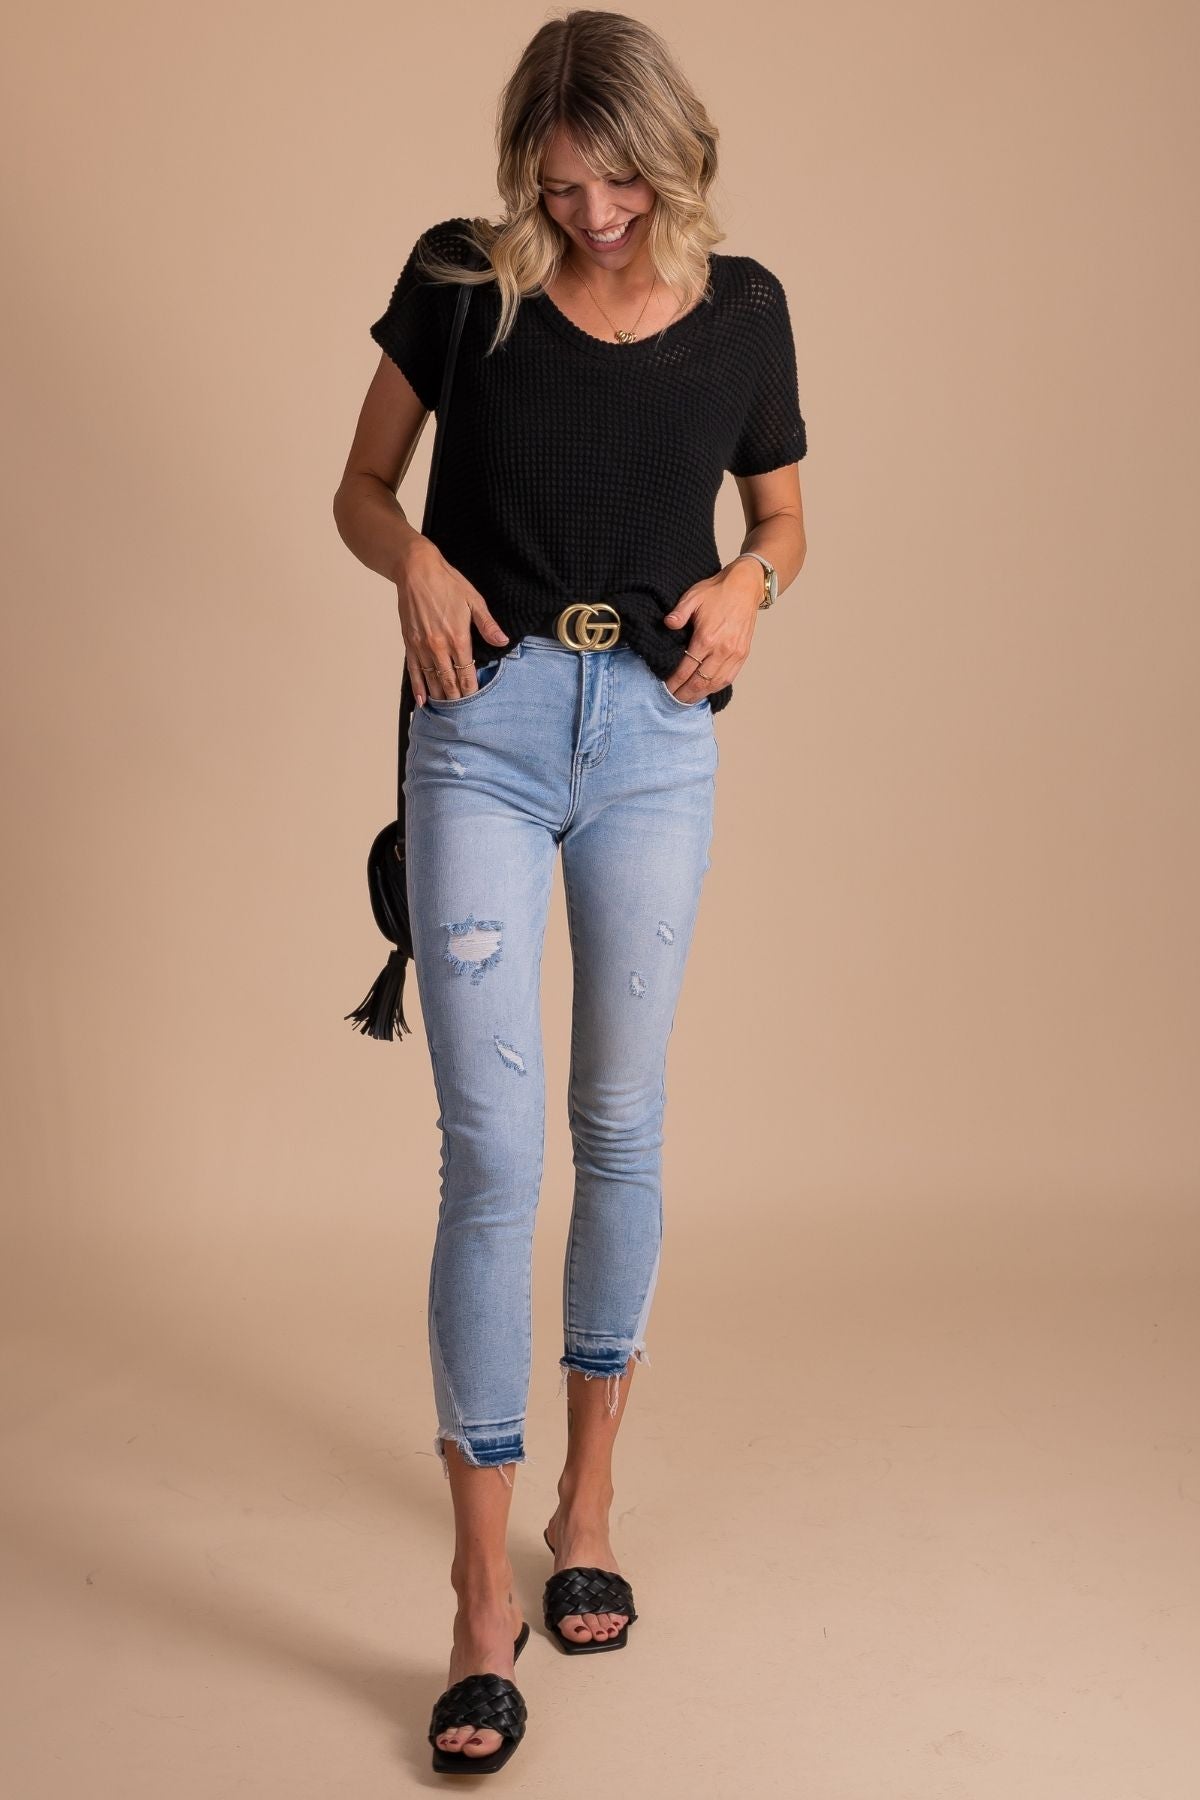 Women's Black High Quality Boutique Tops